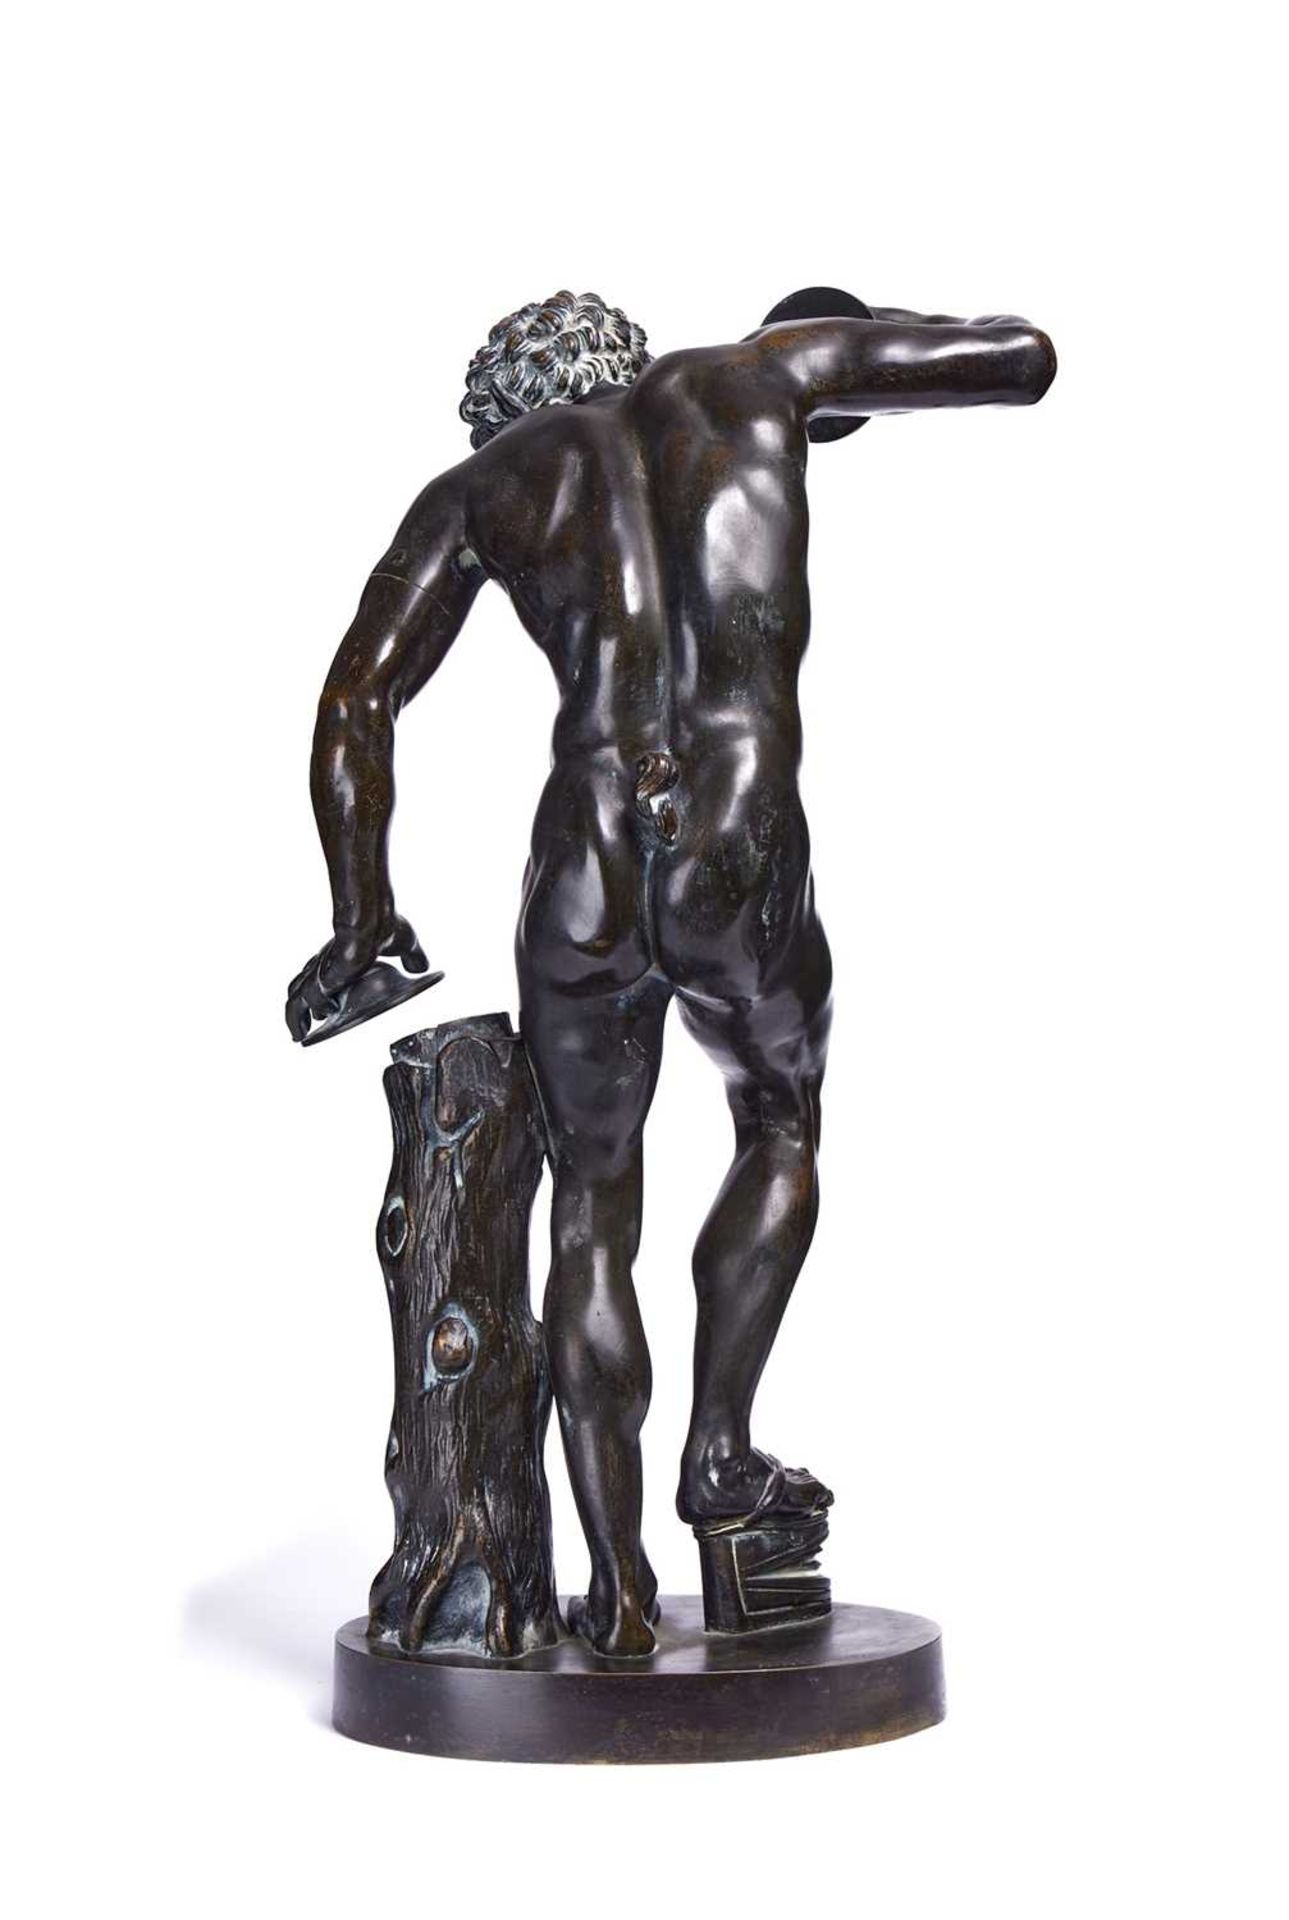 AFTER THE ANTIQUE: A 19TH CENTURY BRONZE OF THE DANCING FAUN WITH CYMBALS - Image 4 of 9